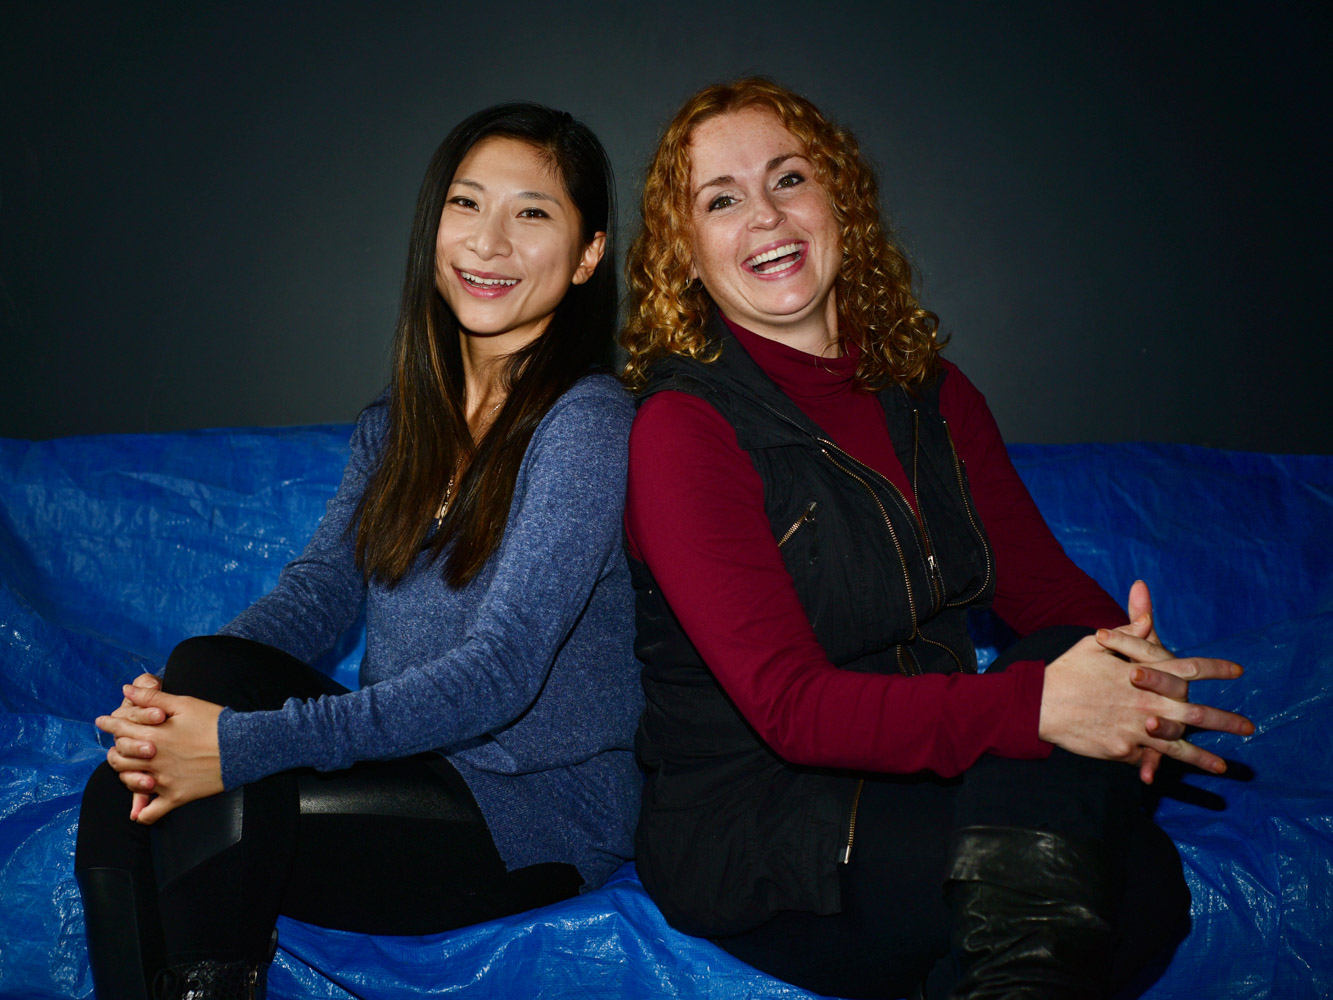 SAE Creative Media Institute students Nicole Chen (left) and Donna Kavanagh (right)